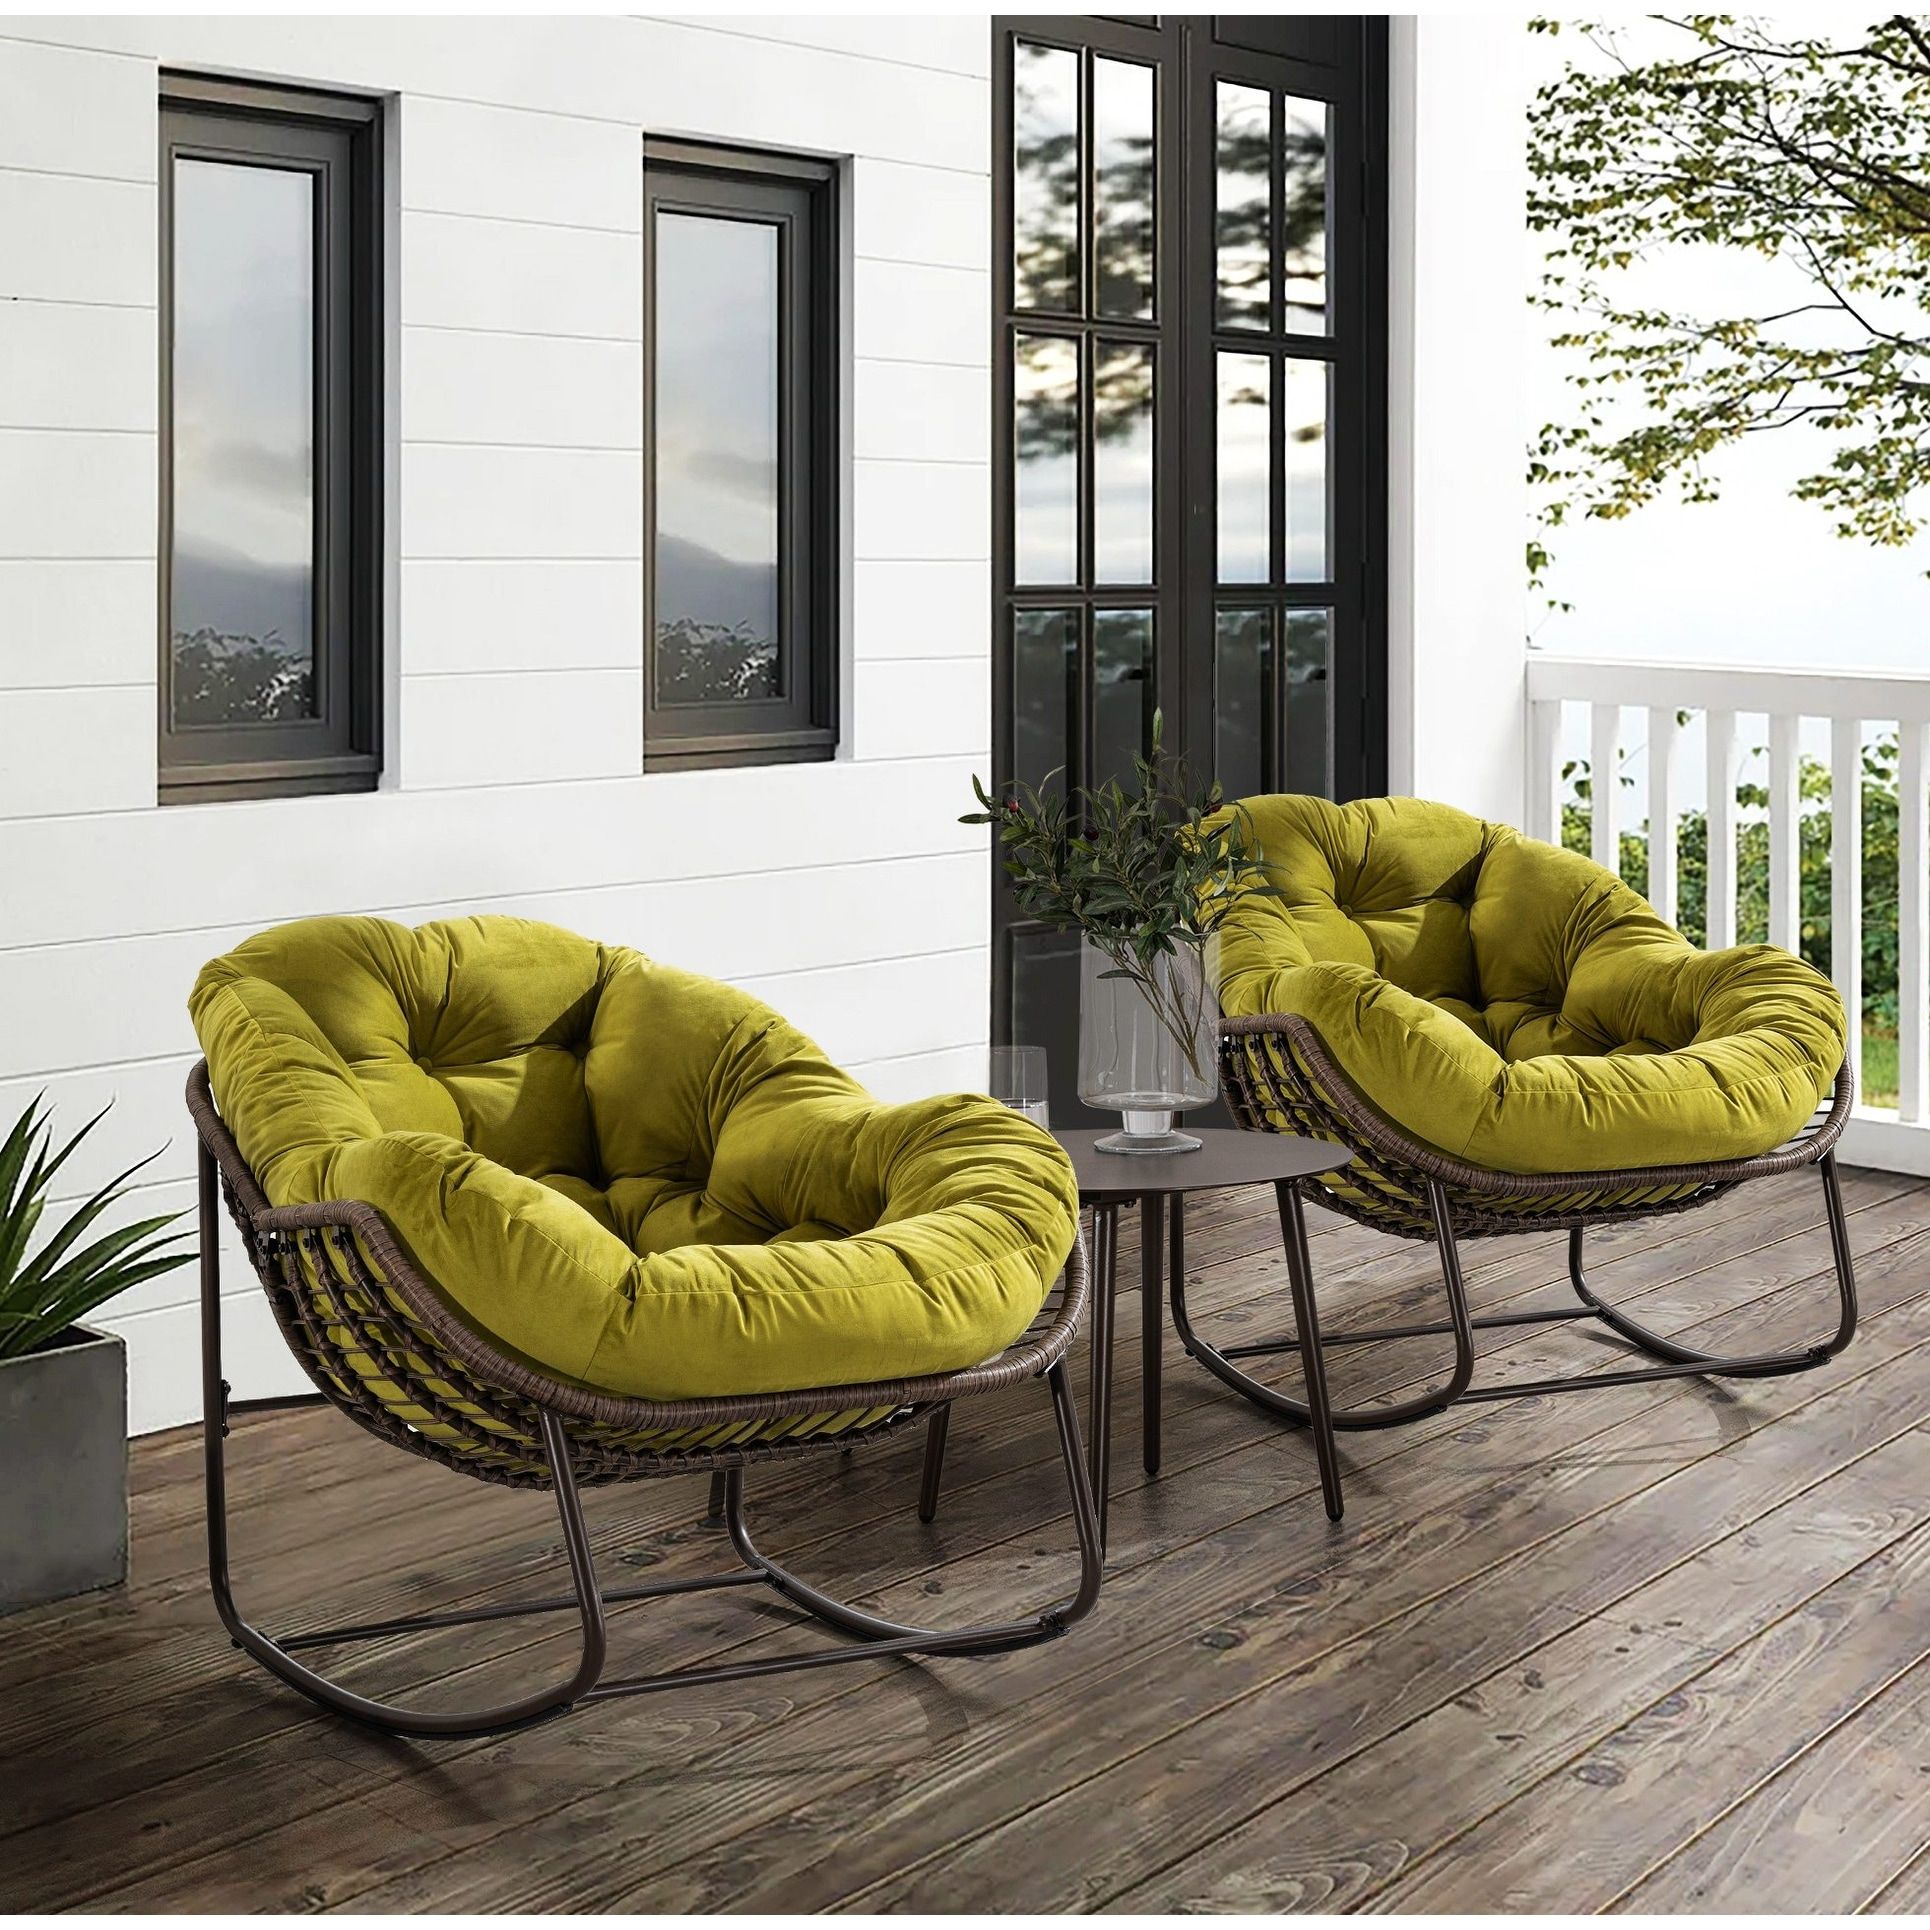 Exploring the Durability and Elegance of Rattan Garden Chairs